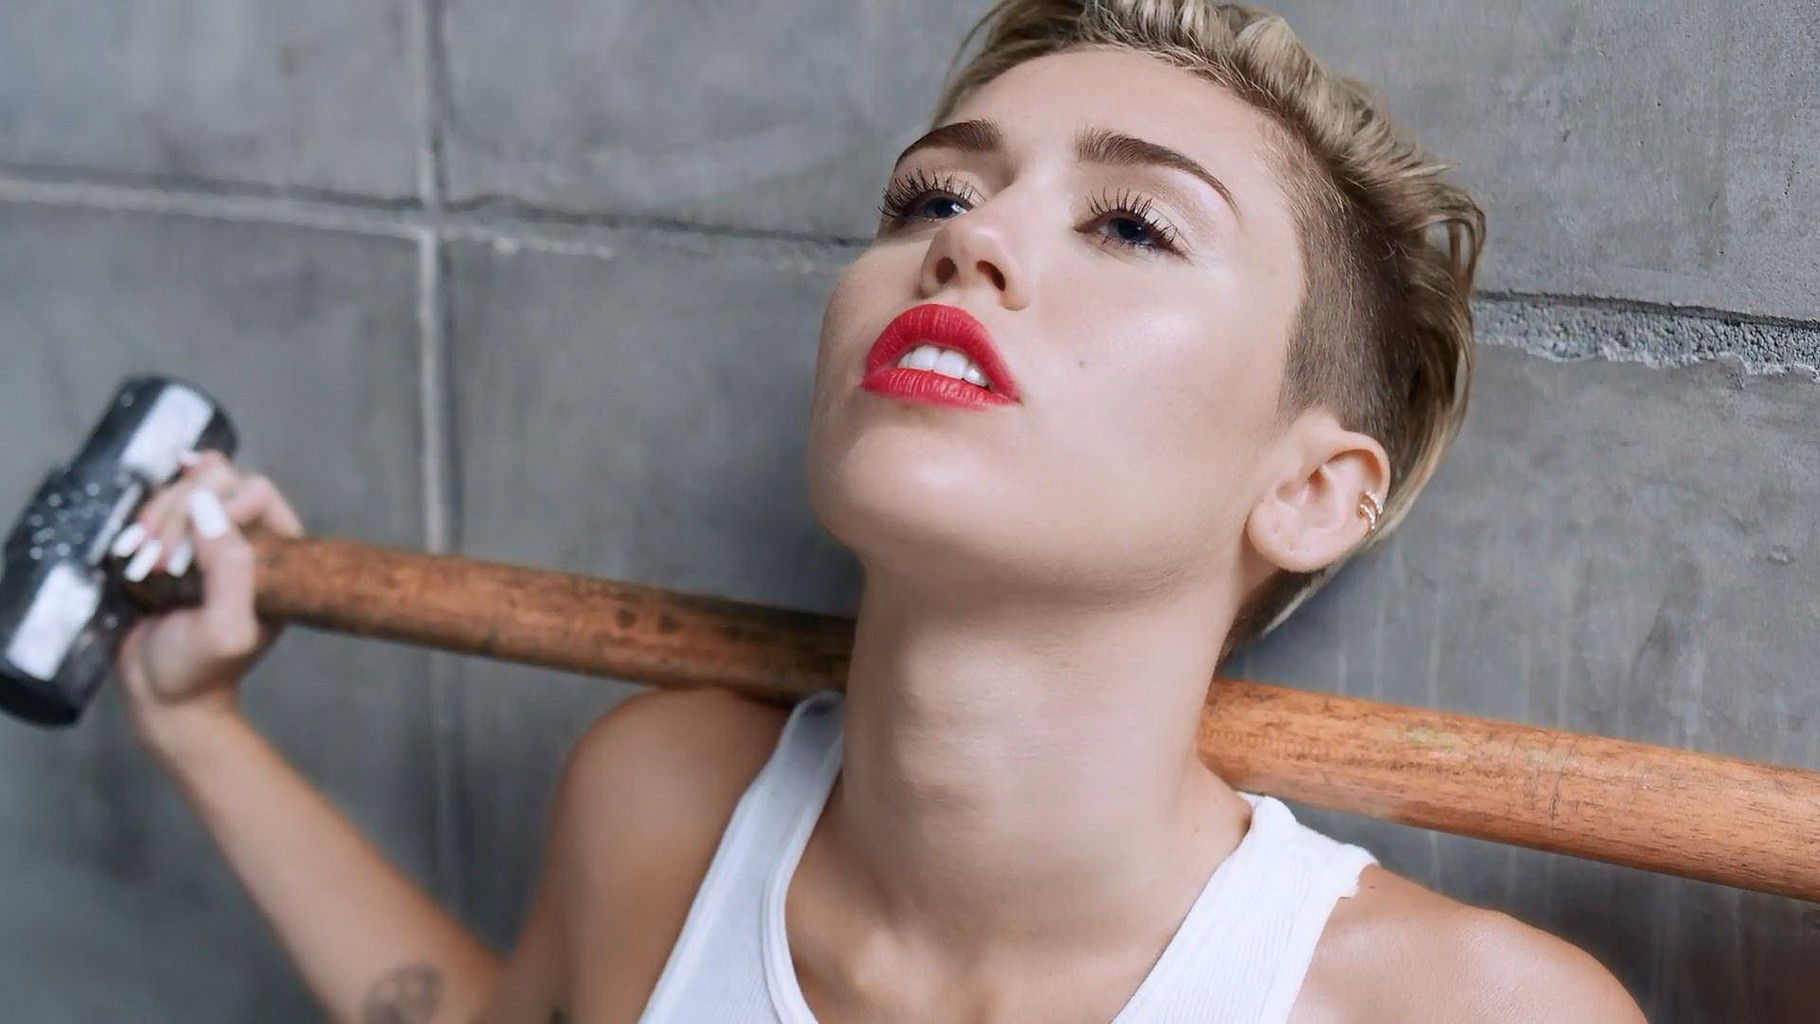 Miley Cyrus shows off her fully naked body while filming Wrecking Ball music vid #75219375